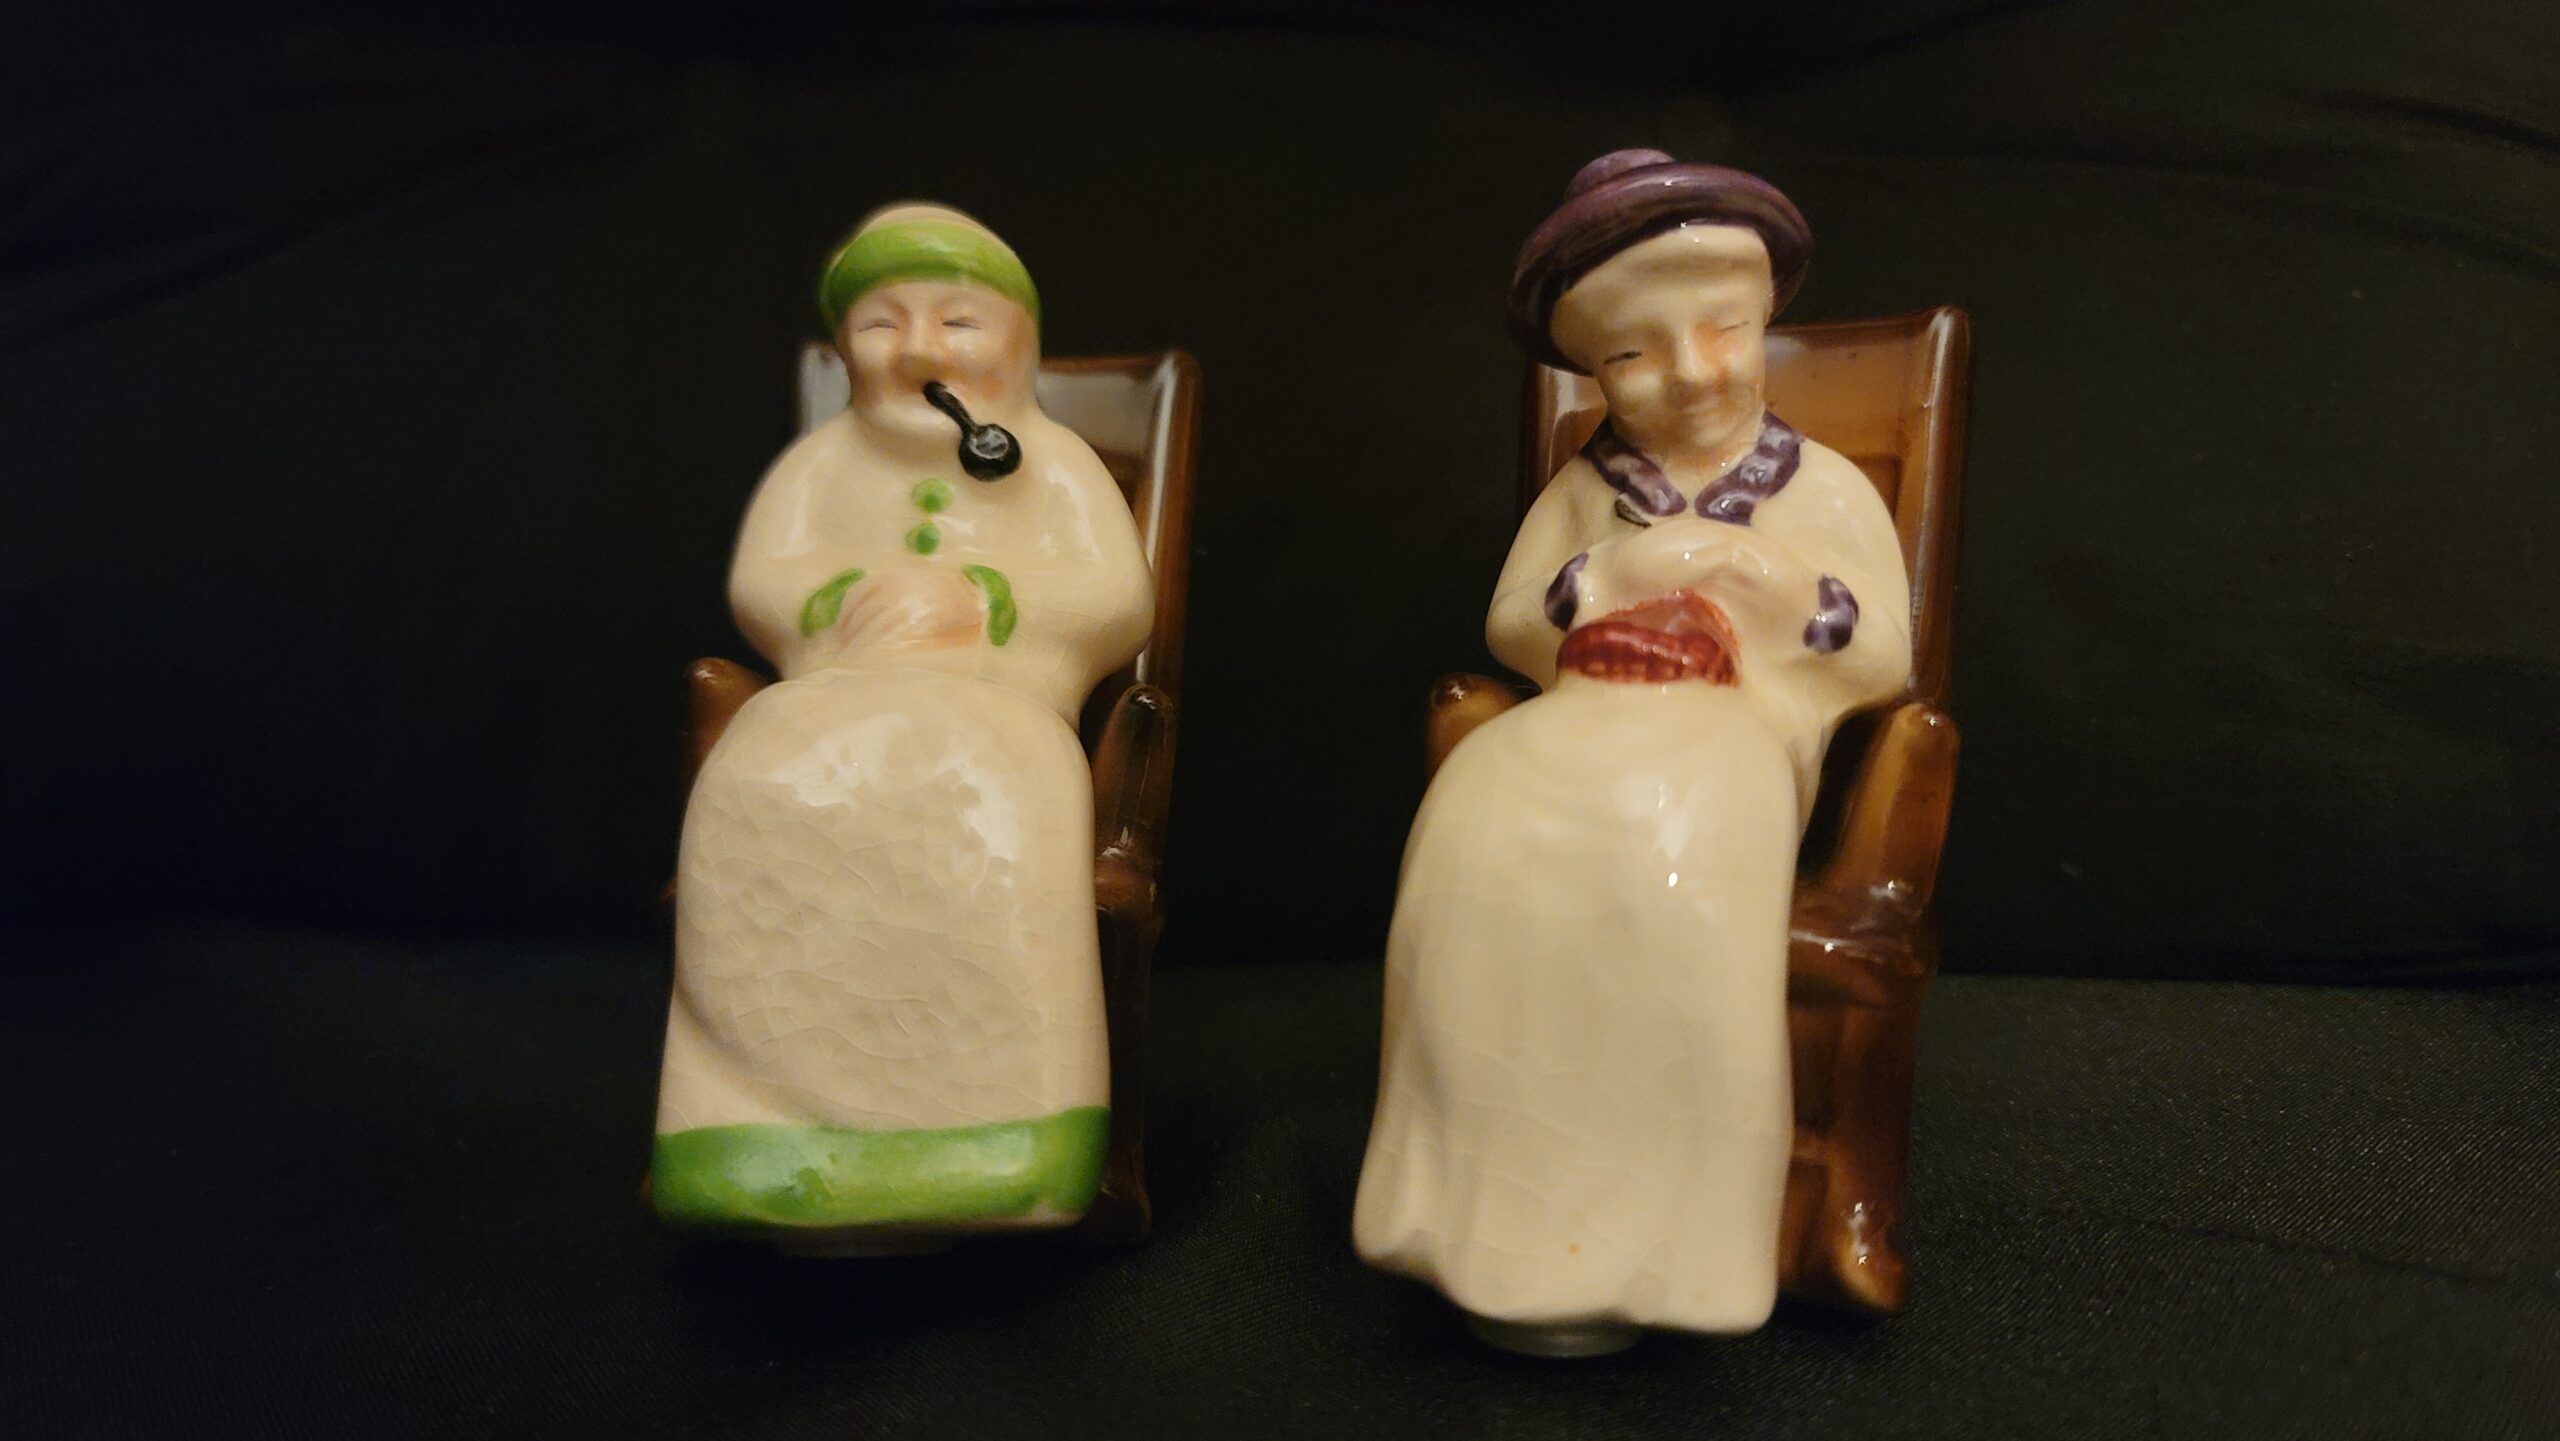 Vintage Salt and Pepper Shakers / Norcrest / Granny in Rocking Chair / Made in Japan